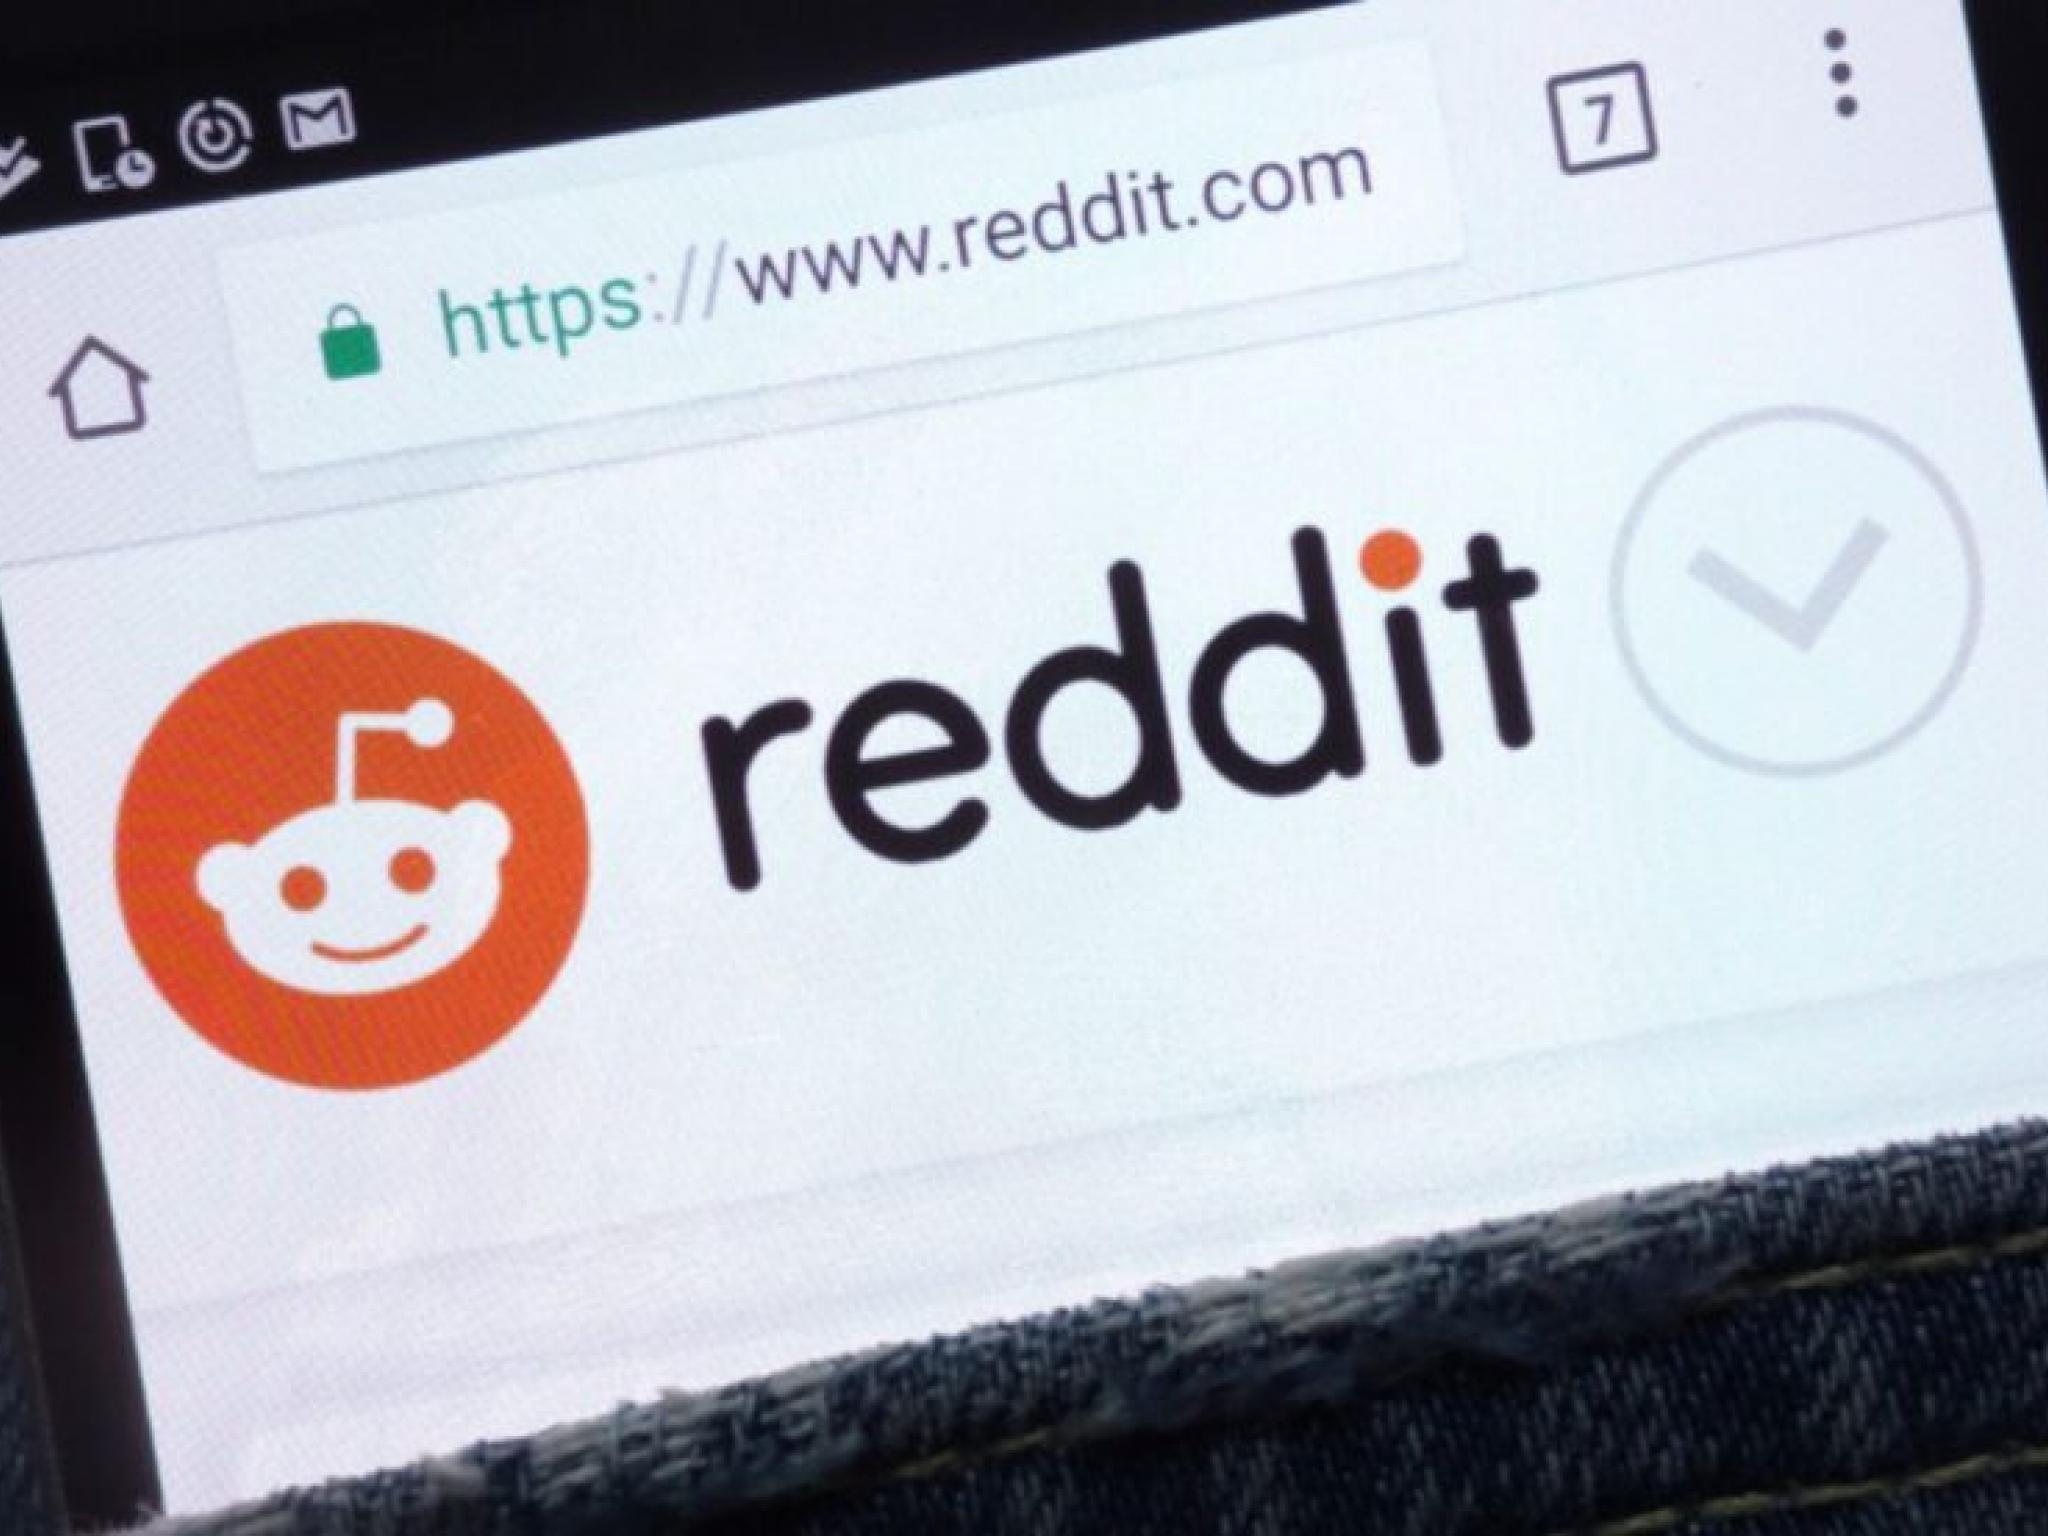  can-reddits-solid-momentum-continue-analysts-say-social-media-company-with-robust-business-model-has-continued-strong-user-growth 